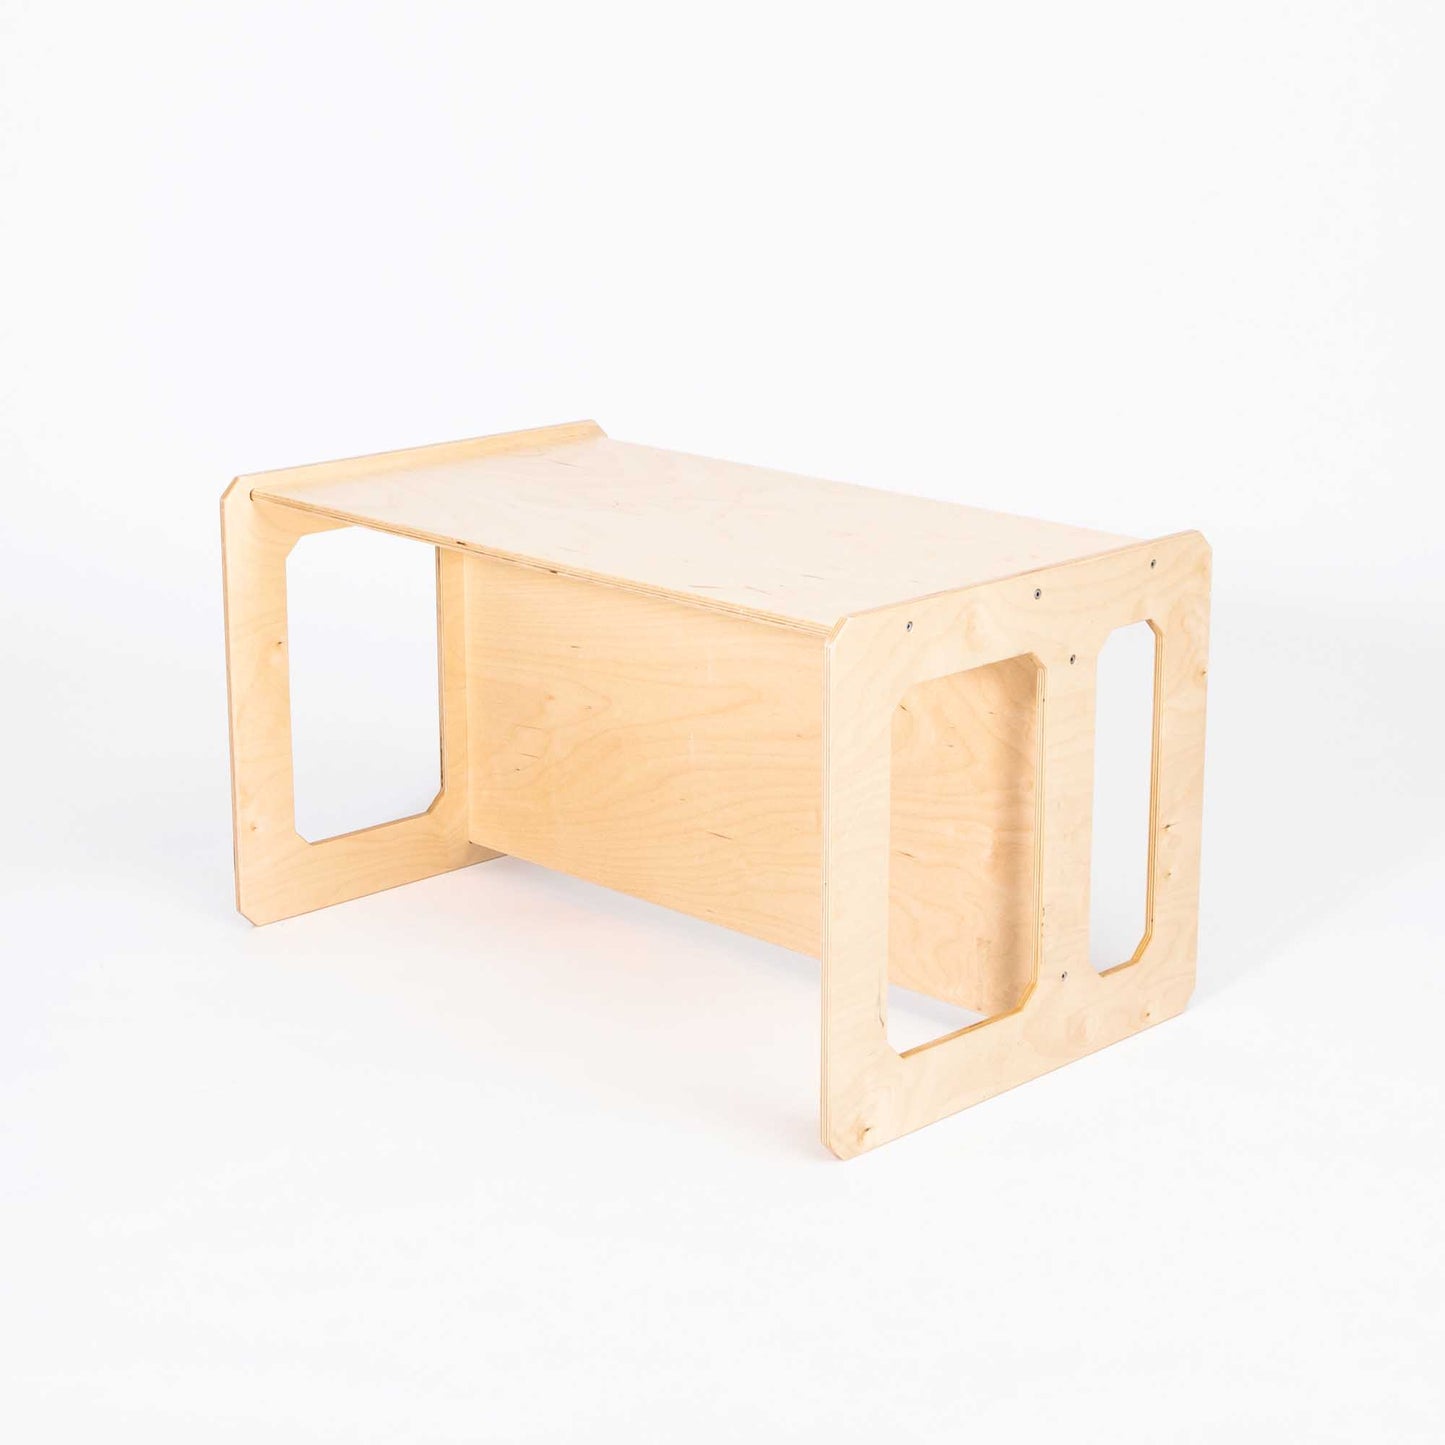 A Montessori weaning table from Sweet Home From Wood on a white background.